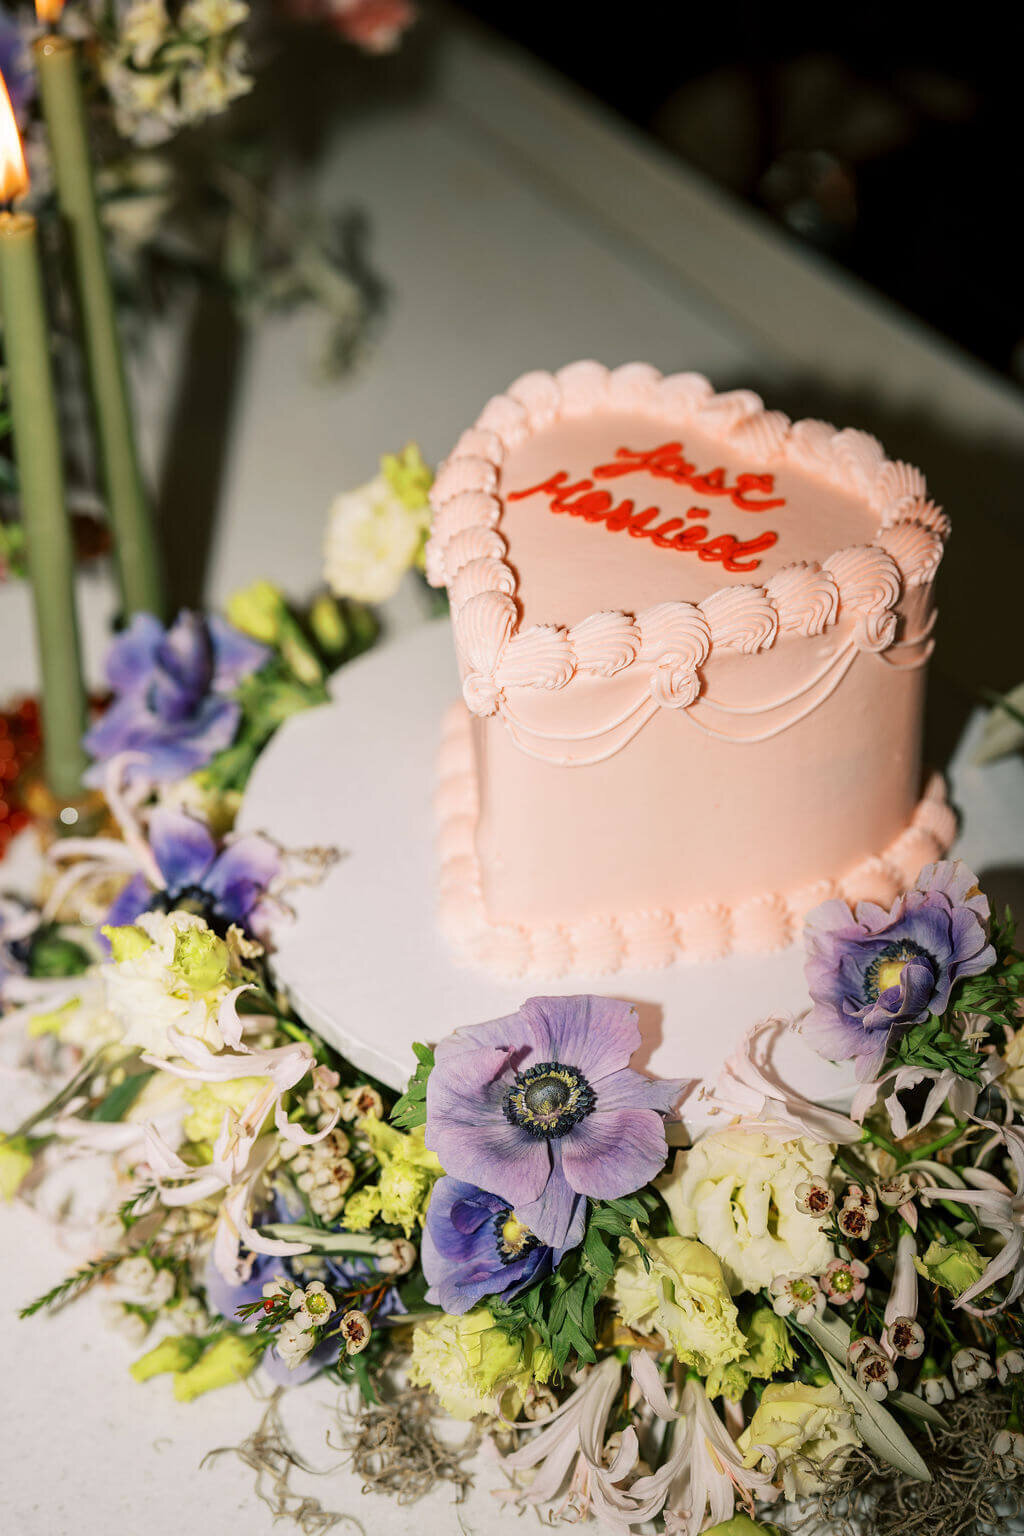 Just married elopement cake by Confections of a Rockstar